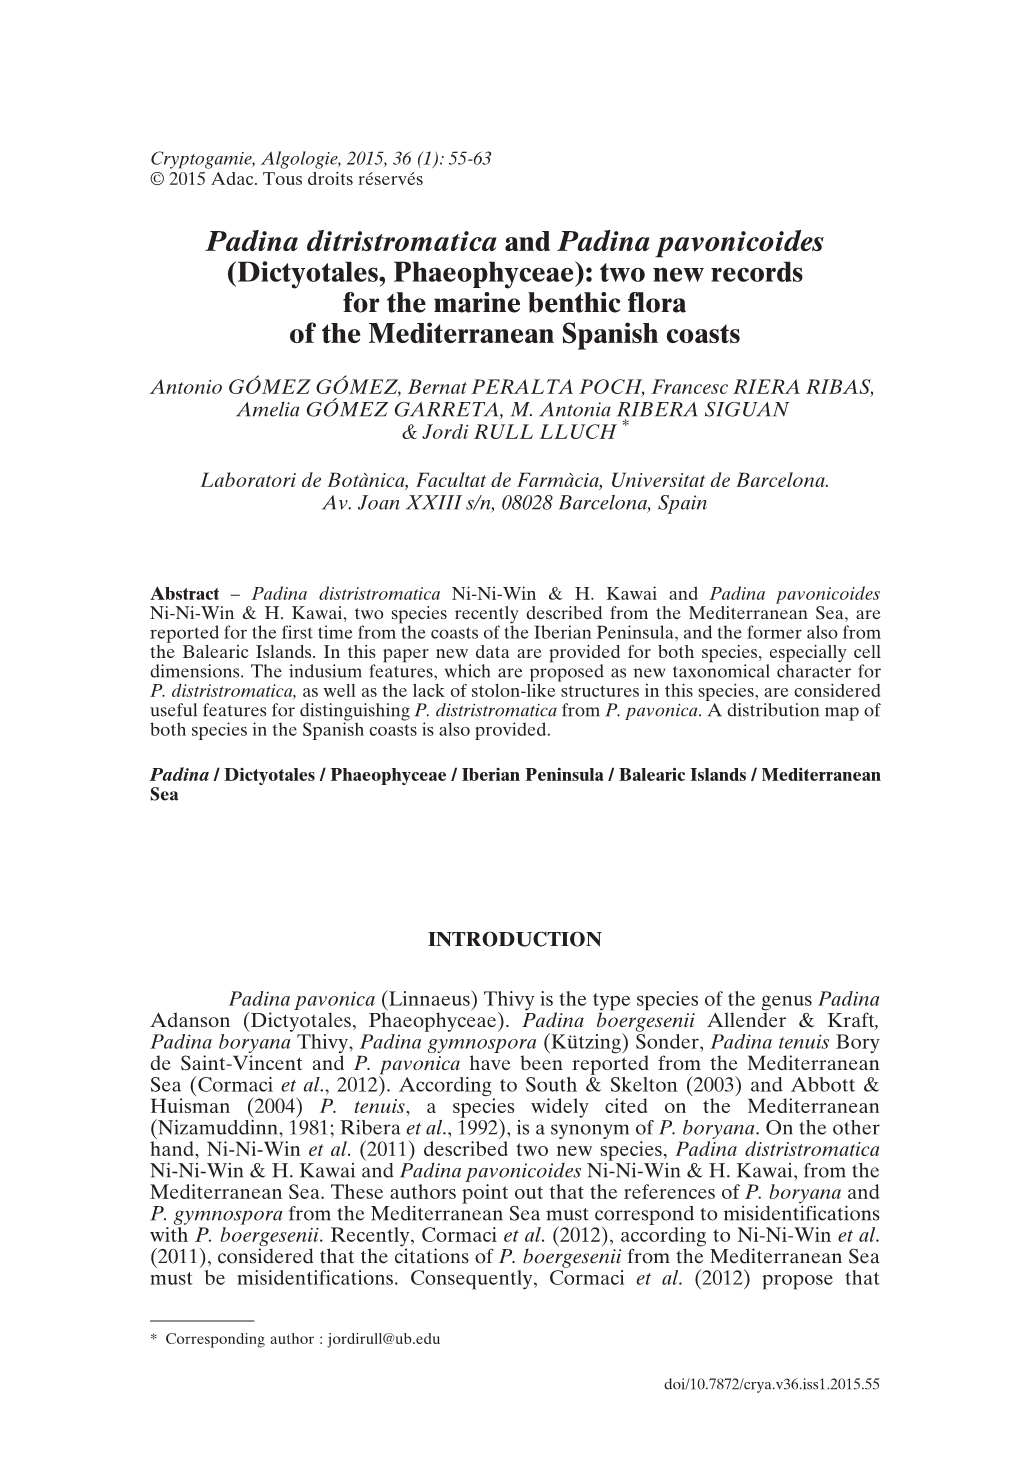 Padina Ditristromatica and Padina Pavonicoides (Dictyotales, Phaeophyceae): Two New Records for the Marine Benthic Flora of the Mediterranean Spanish Coasts